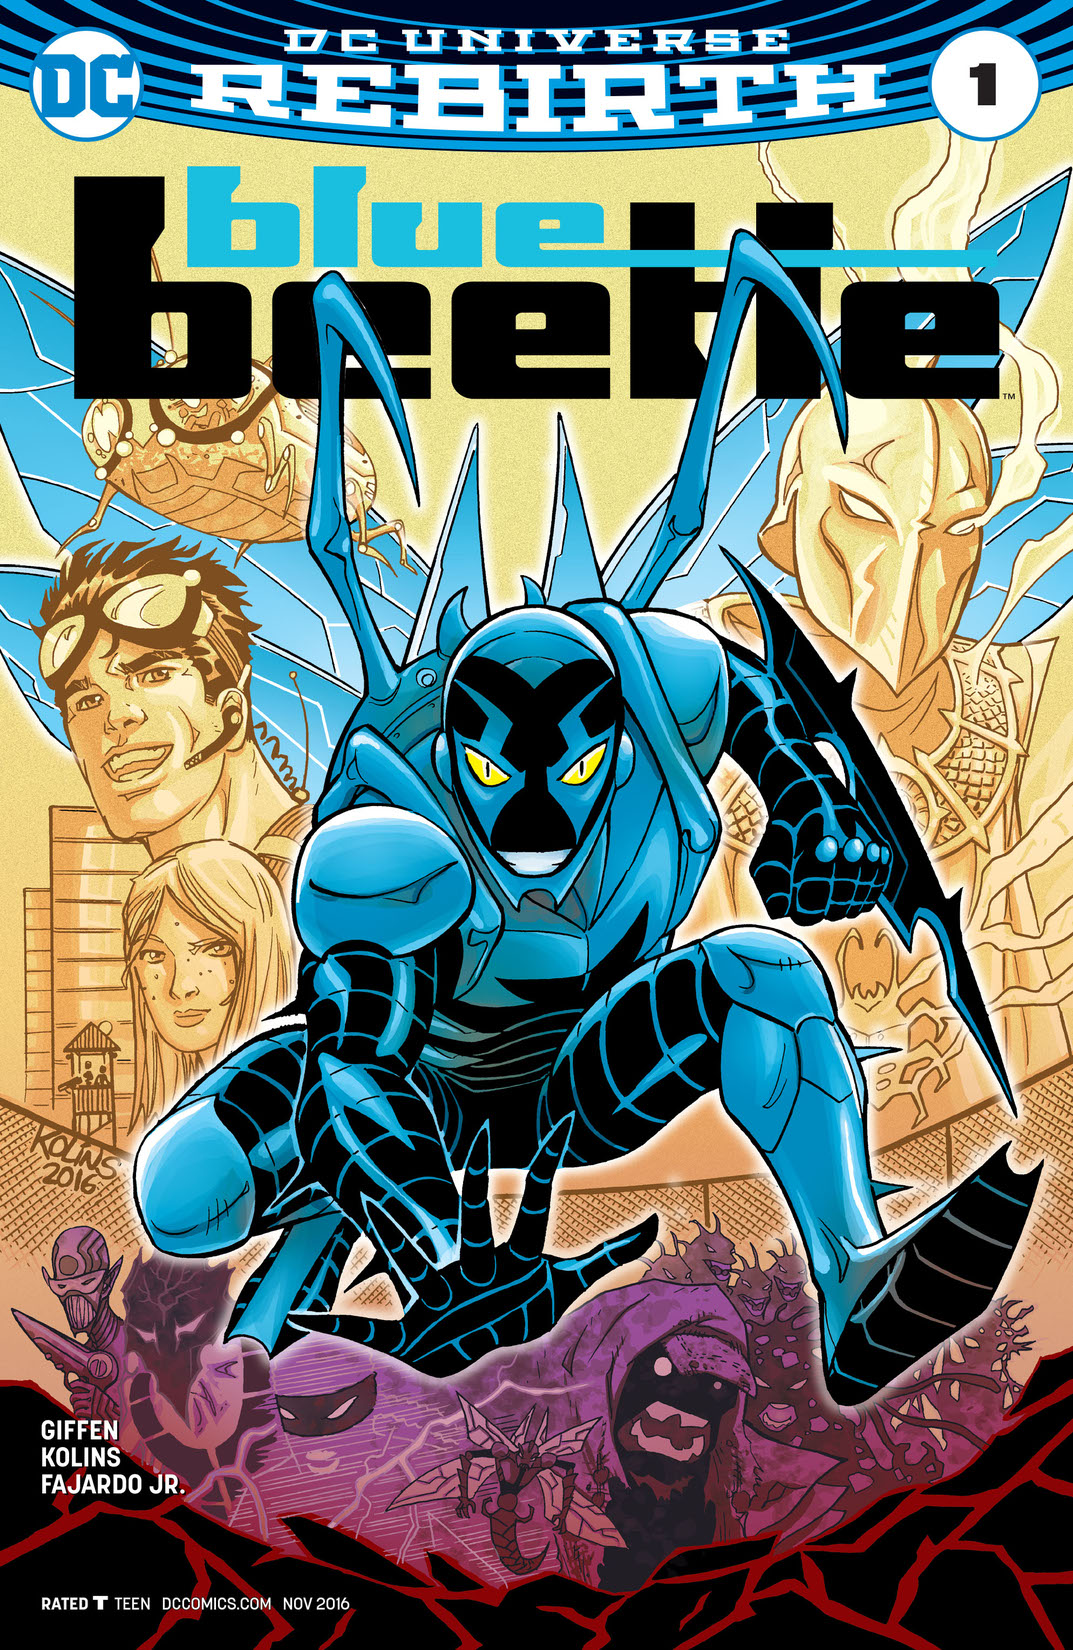 Blue Beetle (2016-) #1 preview images